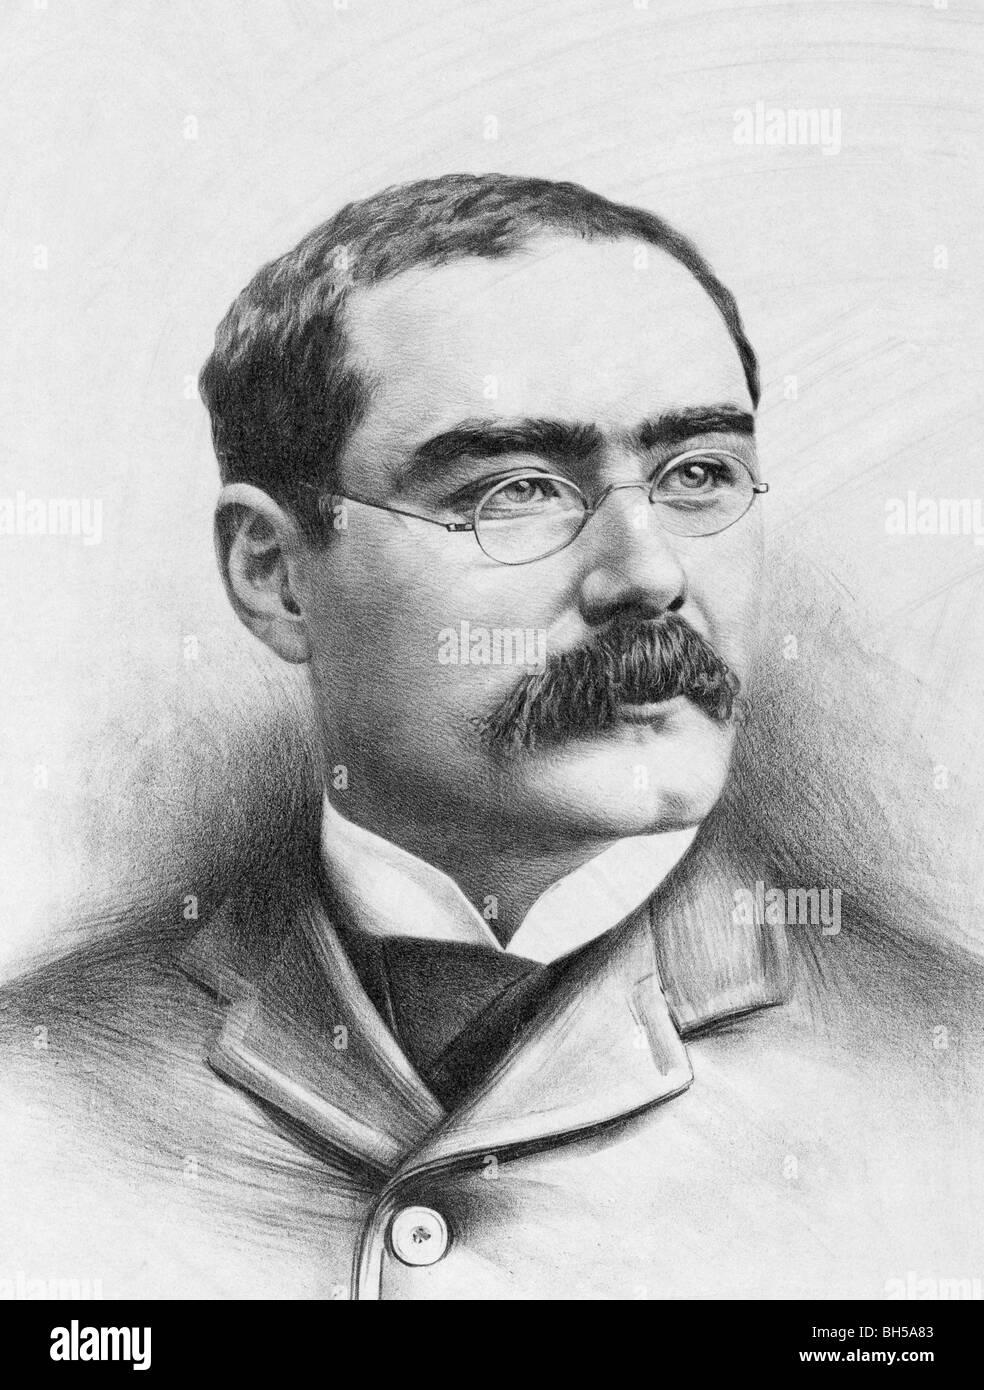 Rudyard Kipling High Resolution Stock Photography and Images - Alamy